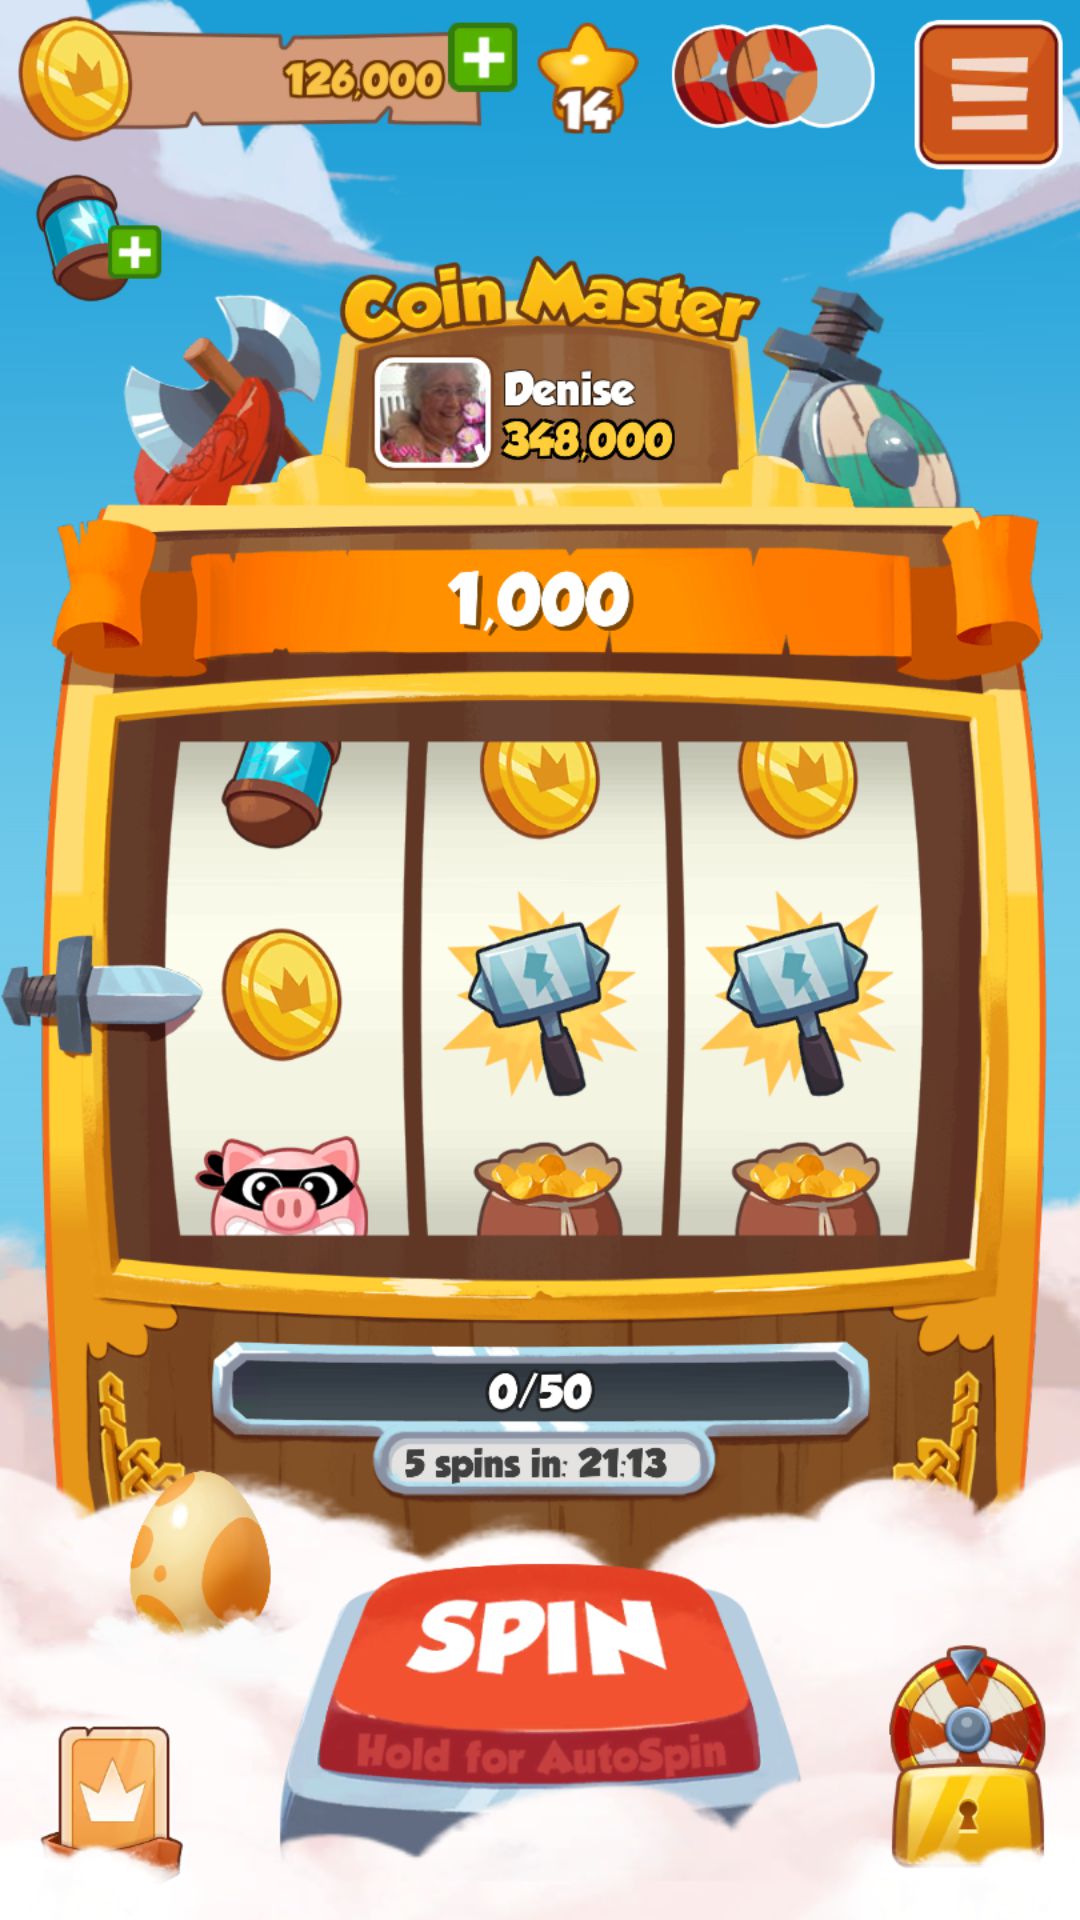 How to get coins and spins on coin master